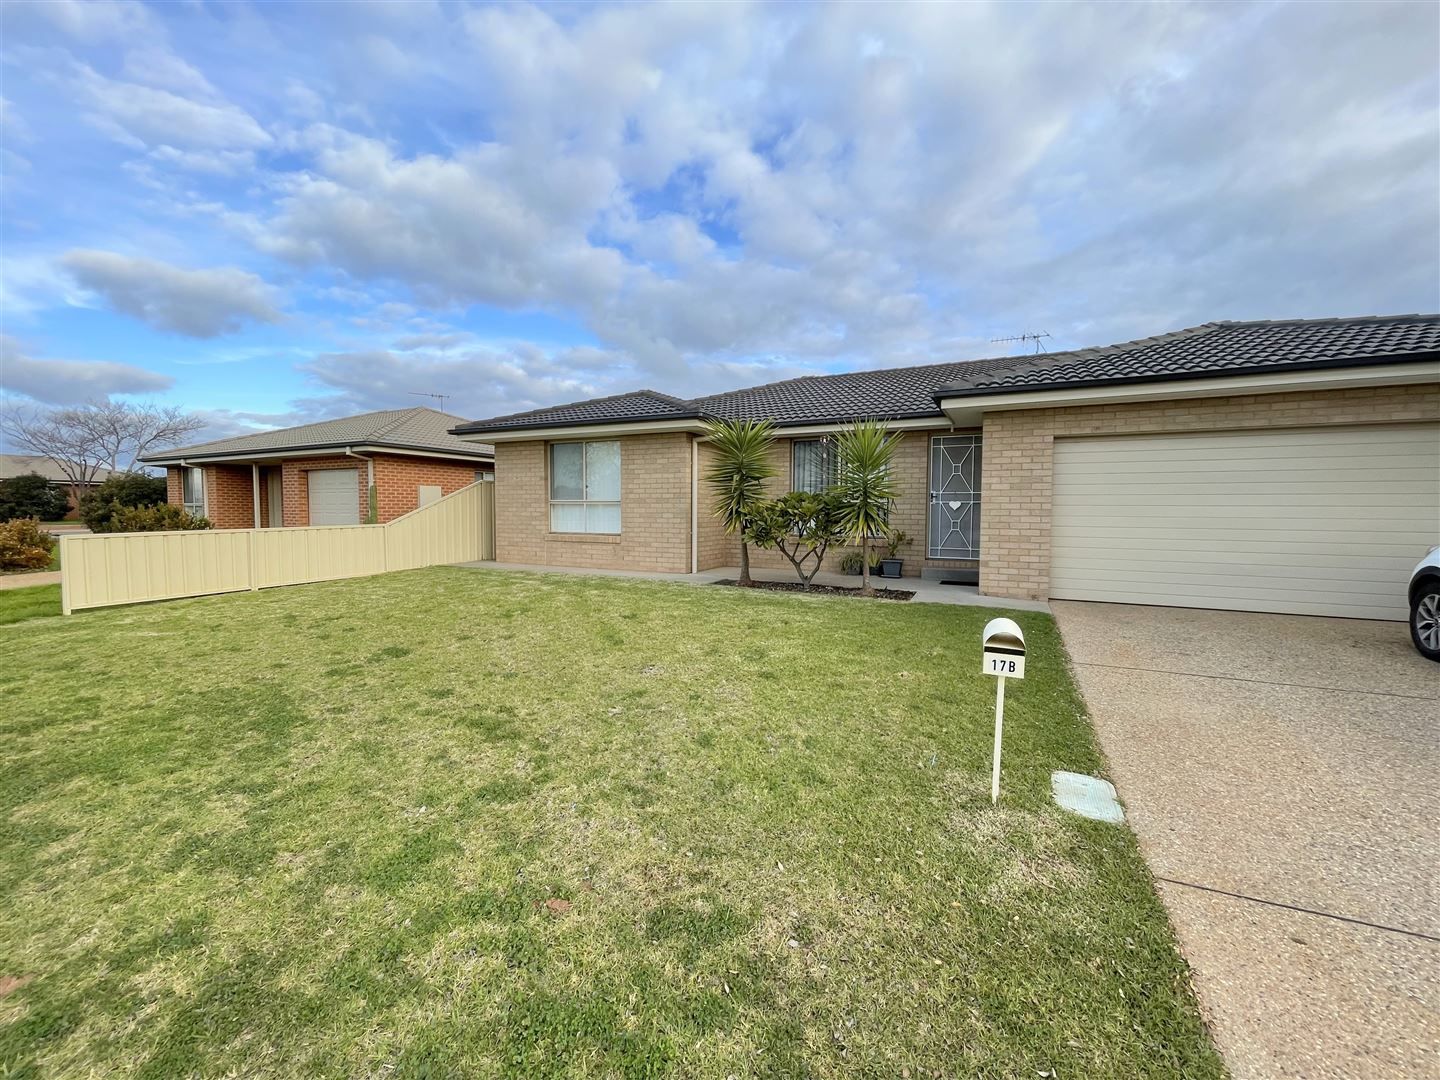 3 bedrooms House in 17B Little Road GRIFFITH NSW, 2680